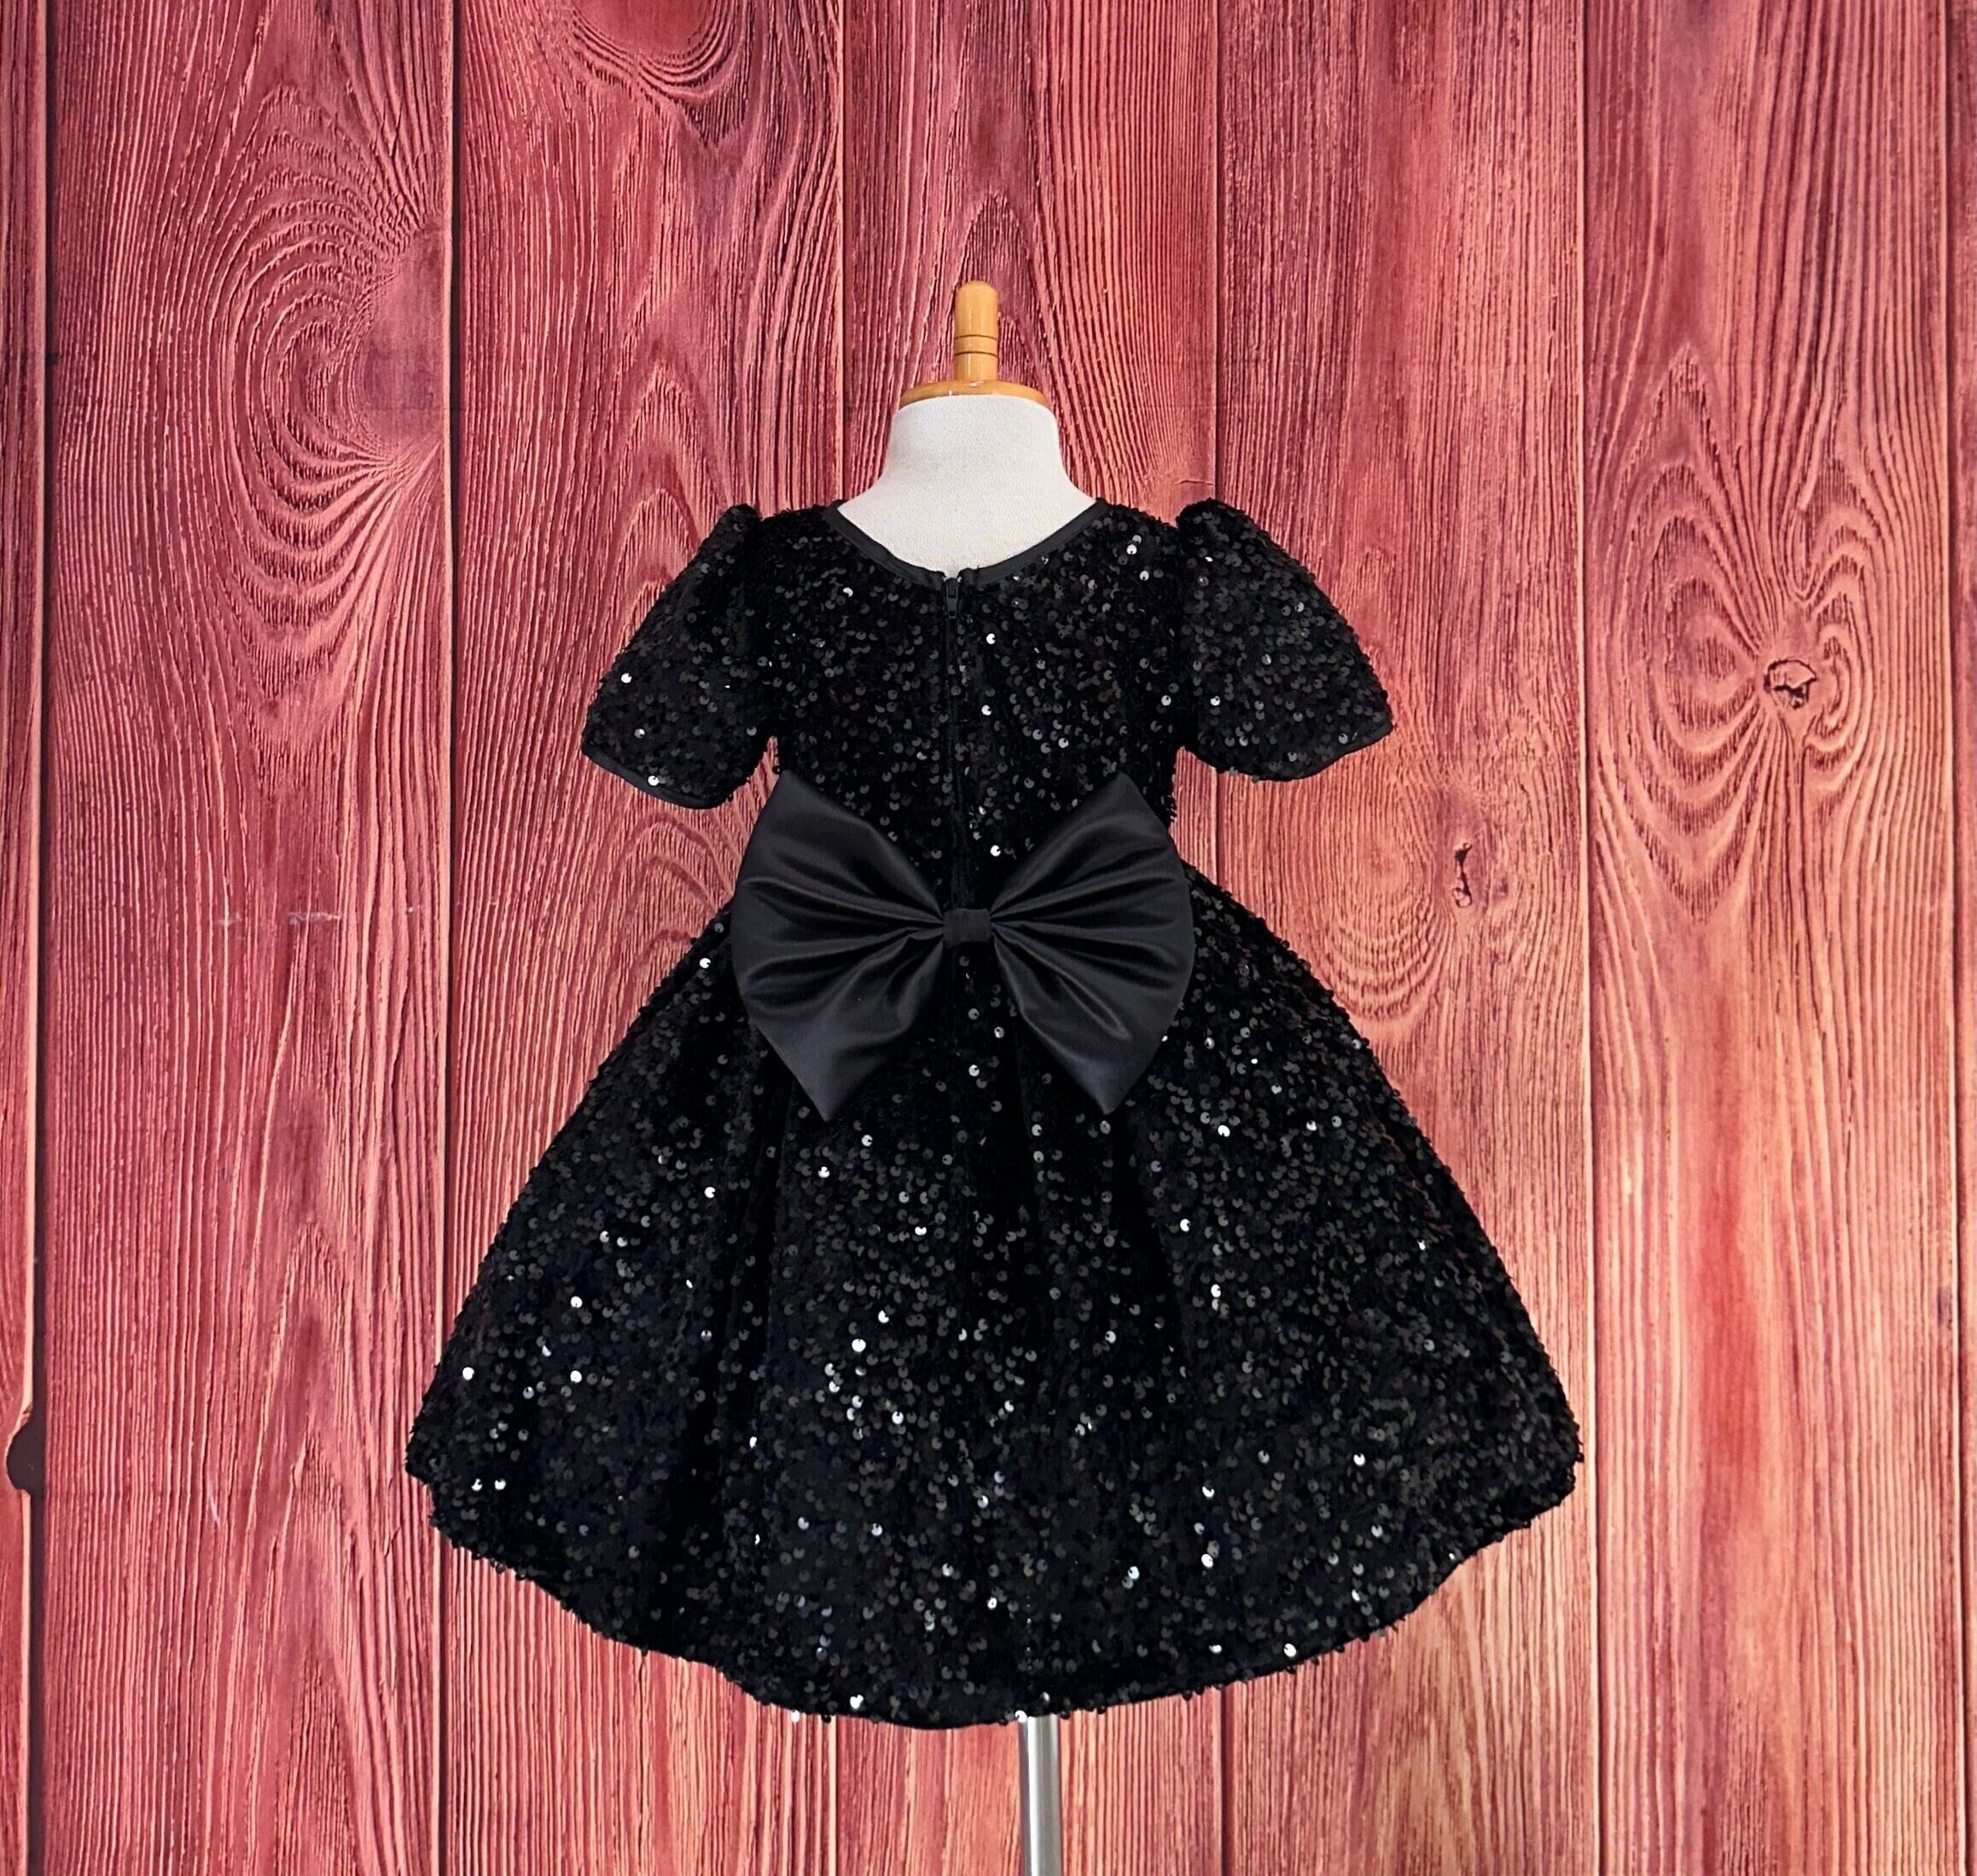 knotted Baby Gowns - Harp Angel Boutique - Harp Angel Boutique